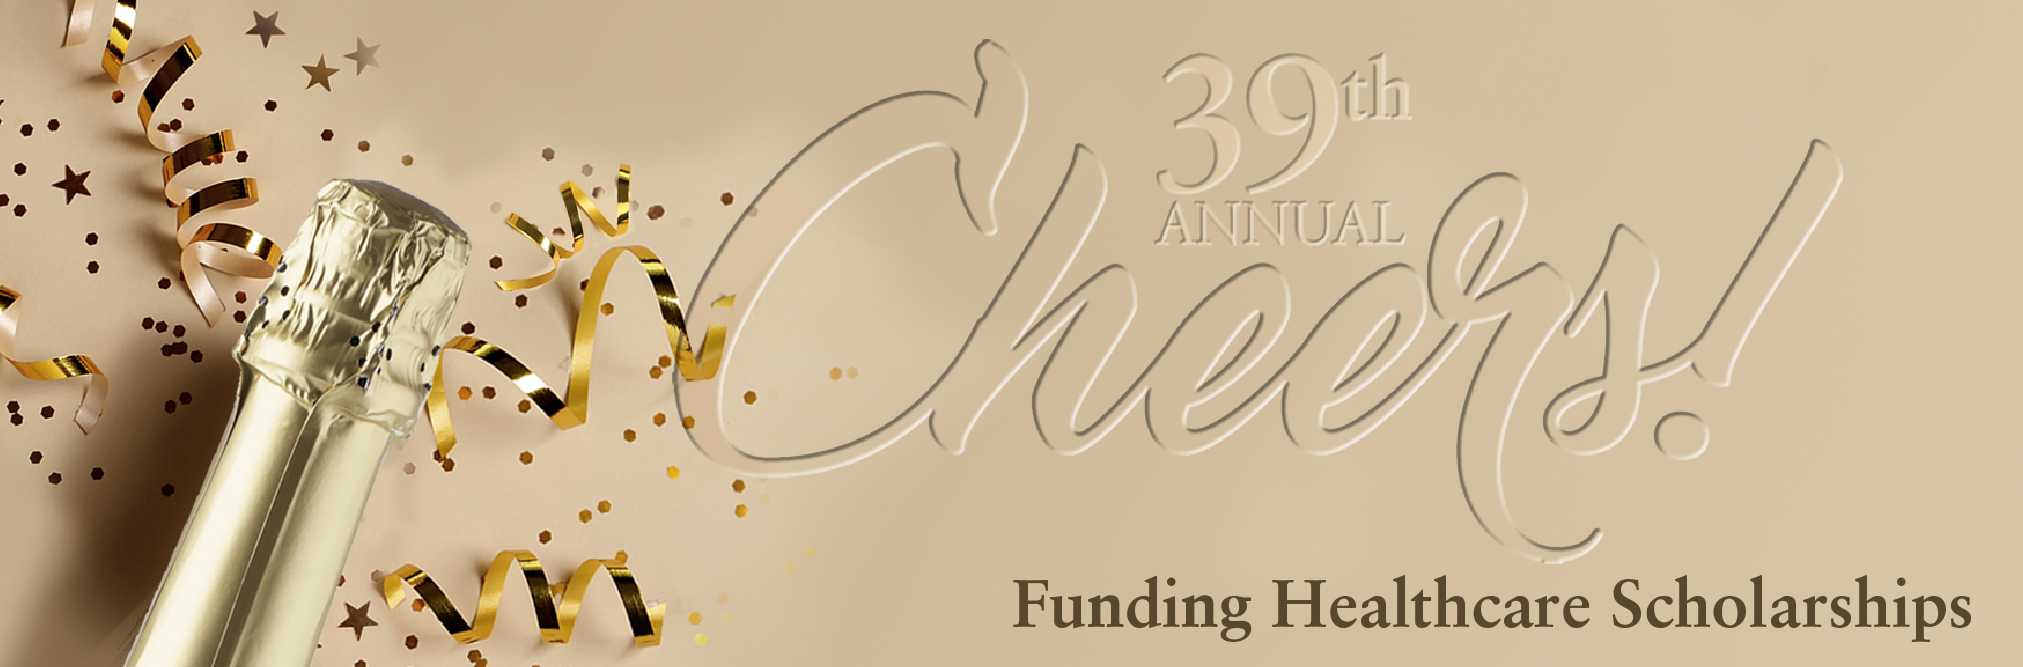 39th Annual Cheers!